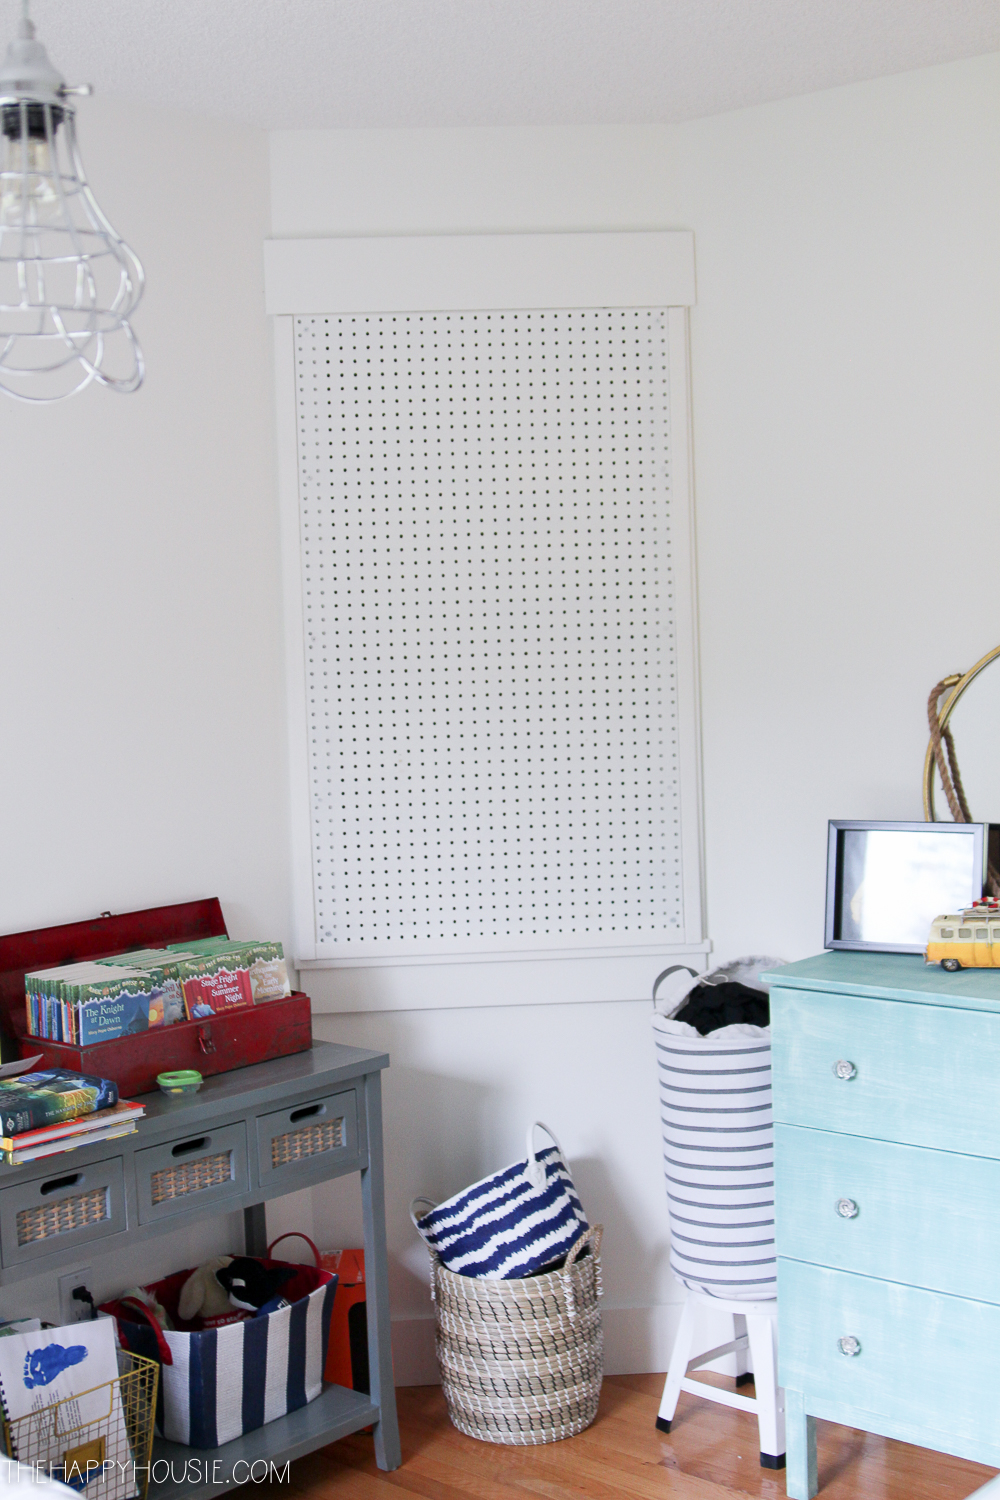 There is a pegboard on the wall.